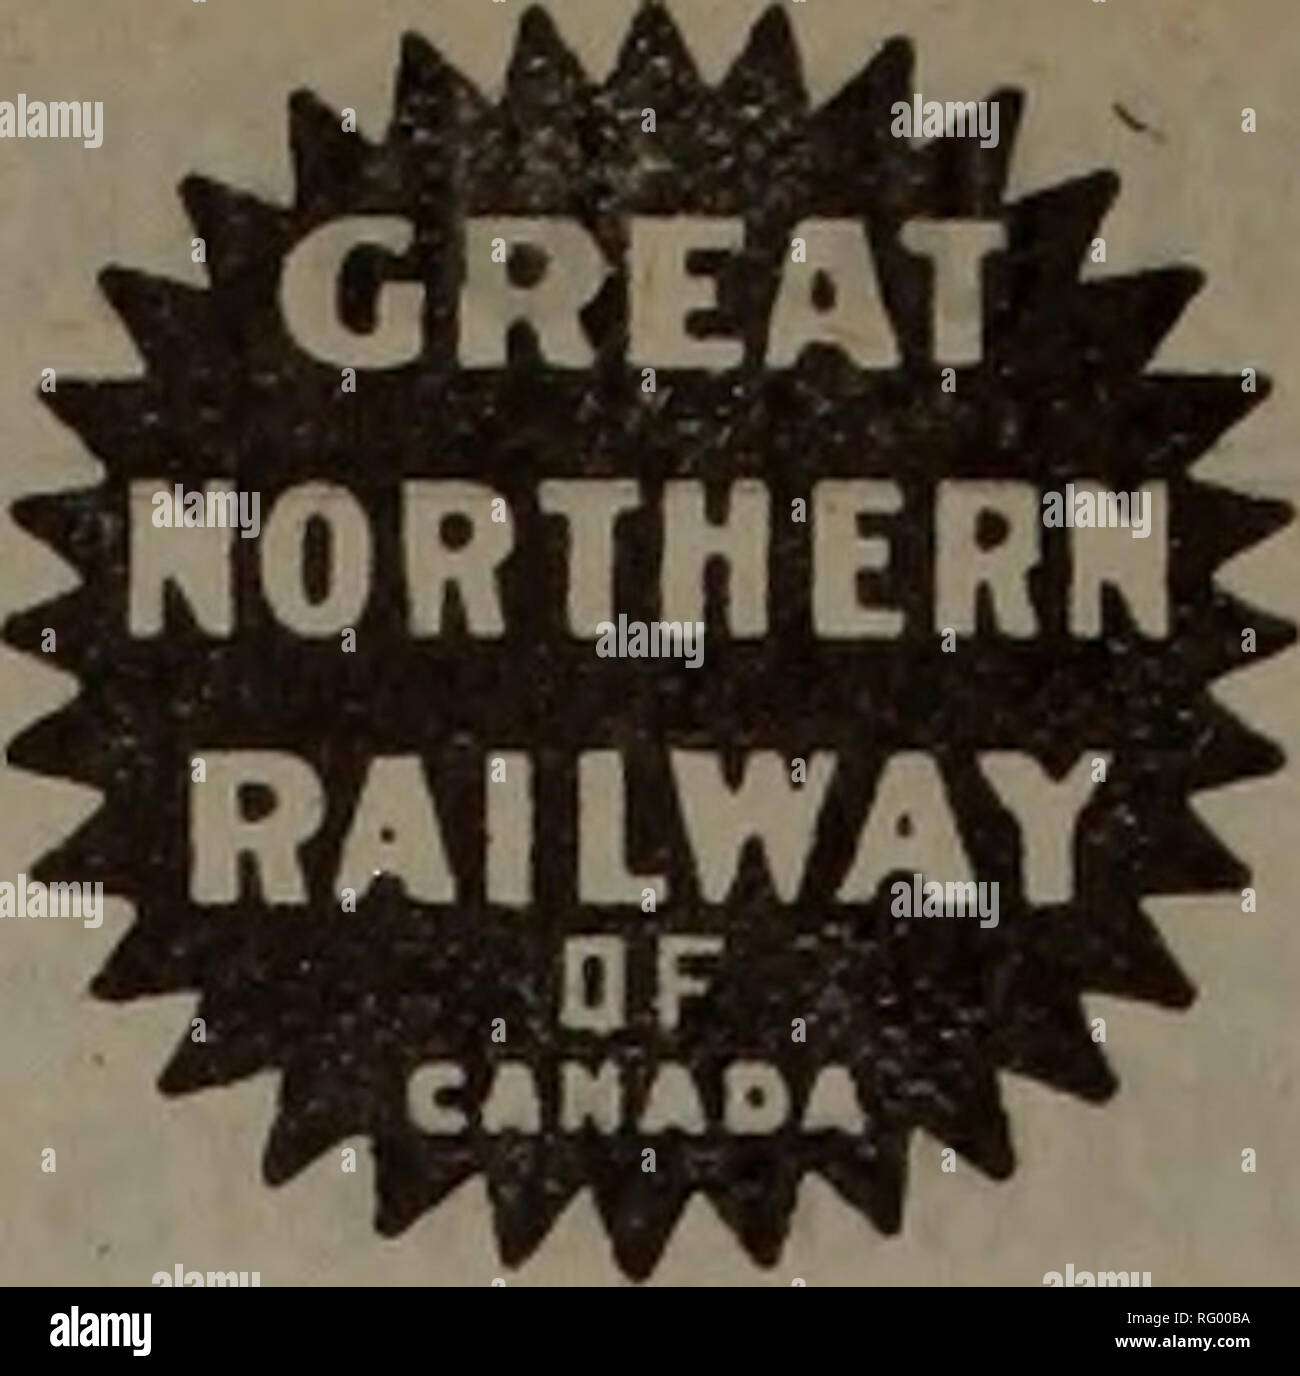 . Canadian forest industries 1903. Lumbering; Forests and forestry; Forest products; Wood-pulp industry; Wood-using industries. vni. Canada Lumberman Weekly EÂ»rran December 30, 1903 CANADA ATLANTIC RAILWAY . . Shorteit and Quickest Route from . Â» . OTTAWA, ROCKLAHU, HAWKBSB0RT, ARH- PRIOR PEMBROKE, PARR? SOUND and other Lumber Centres TO BOSTONt PORTLAND, NEW YORK DETROIT, TONAWANDA, ALBANY, &amp;C, MONTREAL ^TORONTO, QUEBEC, HAII- M.'A. OraENDCÂ°Freiâ¢ Freight ' Board of Trade B R. Bremner, Ass't. General Fgt. Agt. Ottawa 1 n ilding W. P. Hinton, General Freight Agent, Ottawa â¢ â operating Stock Photo